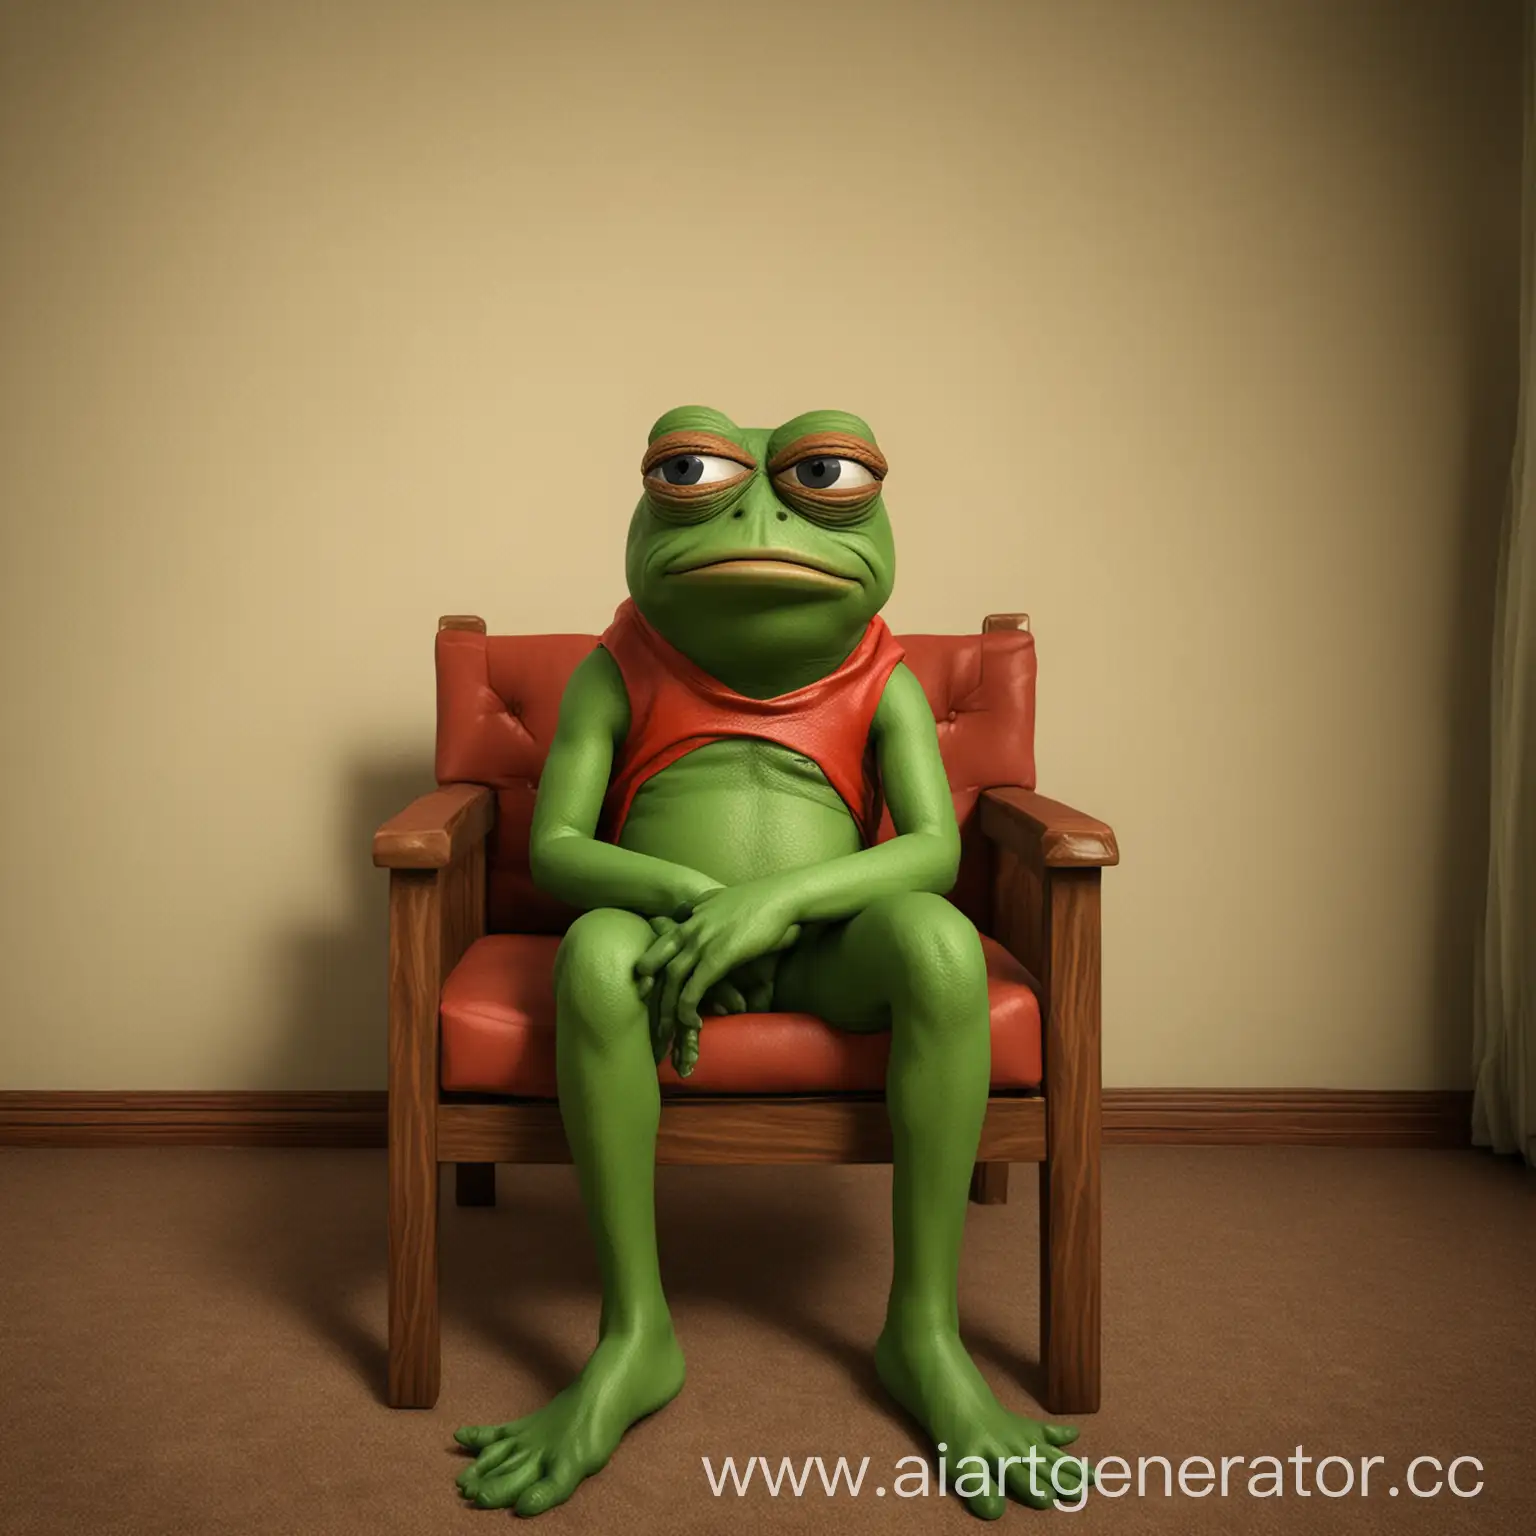 Lonely-Pepe-Frog-Sitting-in-Chair-in-Empty-Room